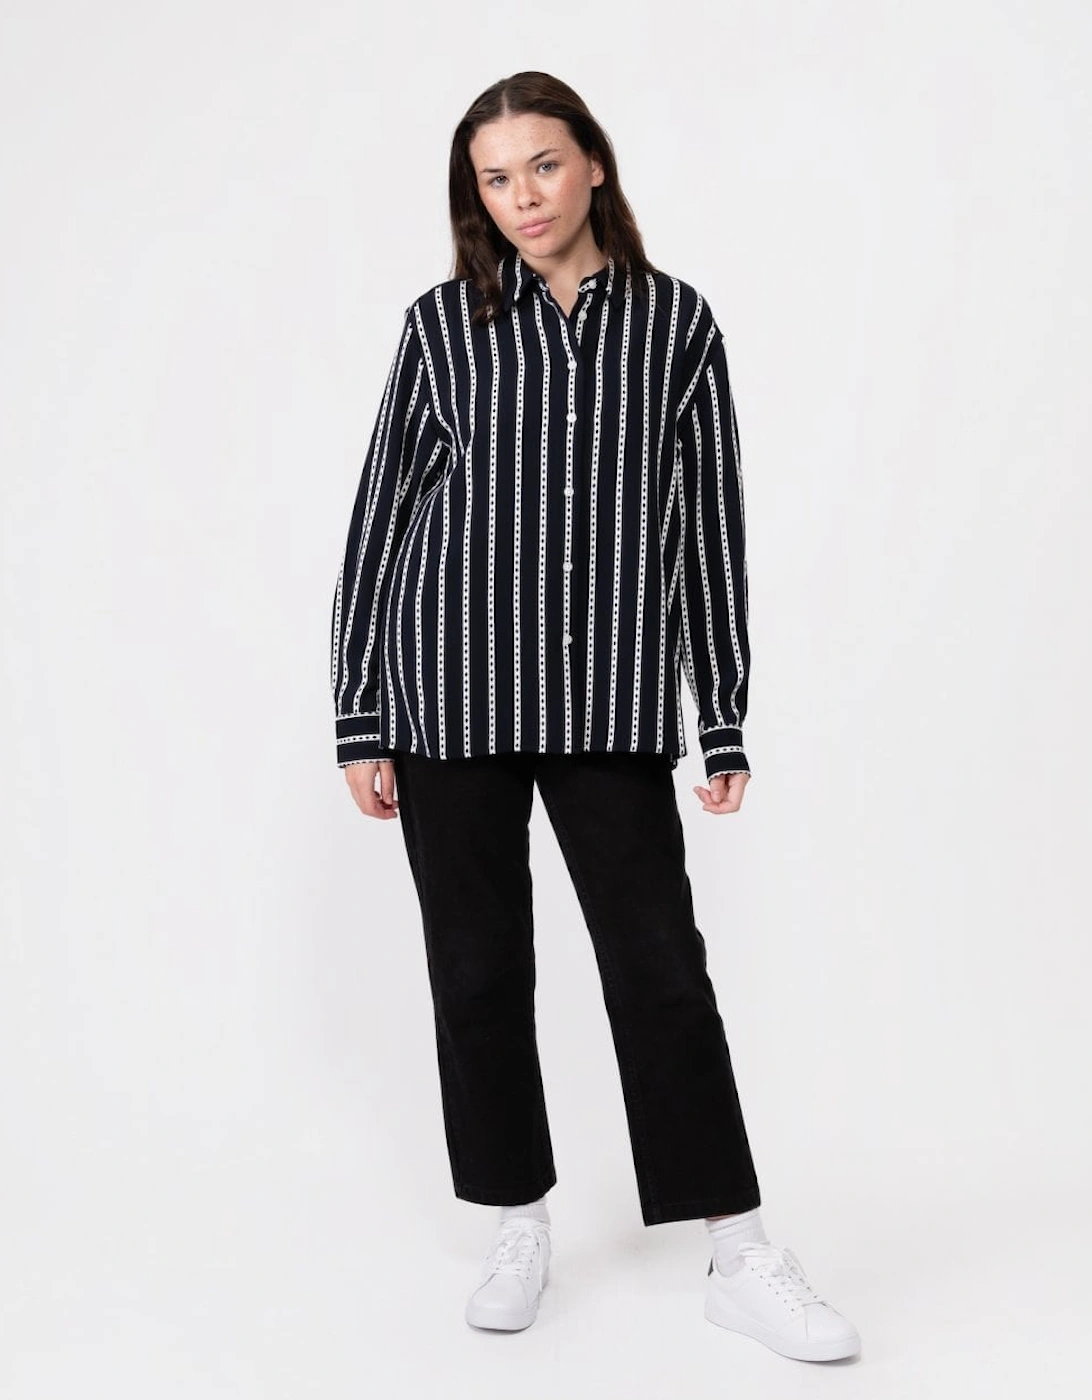 Argyle Stripe Womens Relaxed Fit Shirt